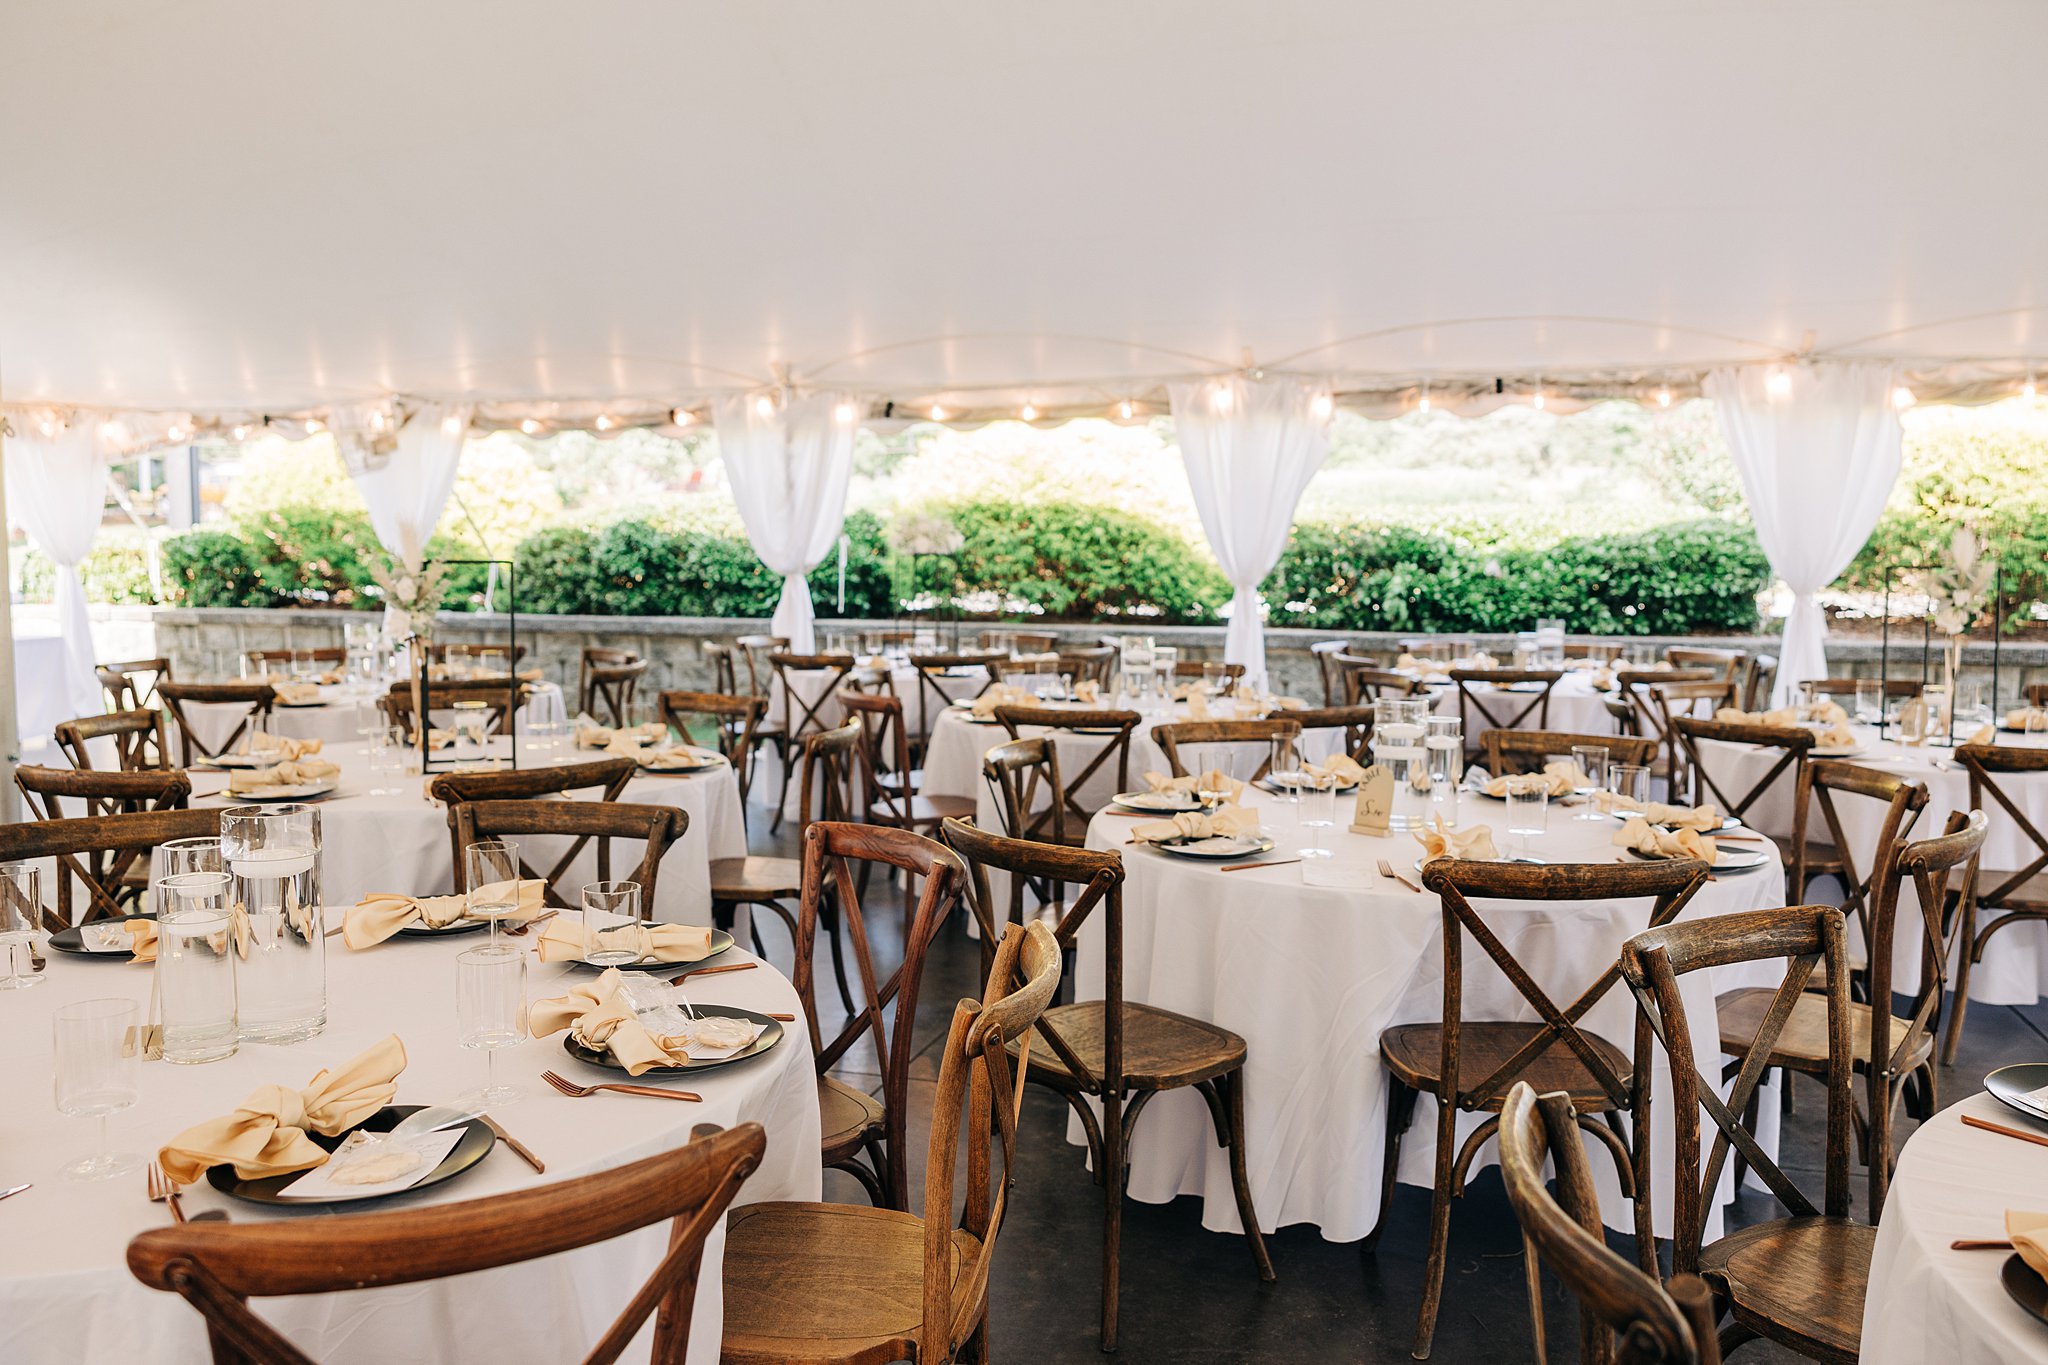 A wedding reception set up with wooden chairs and white linen at the Summerfield Farms wedding venue